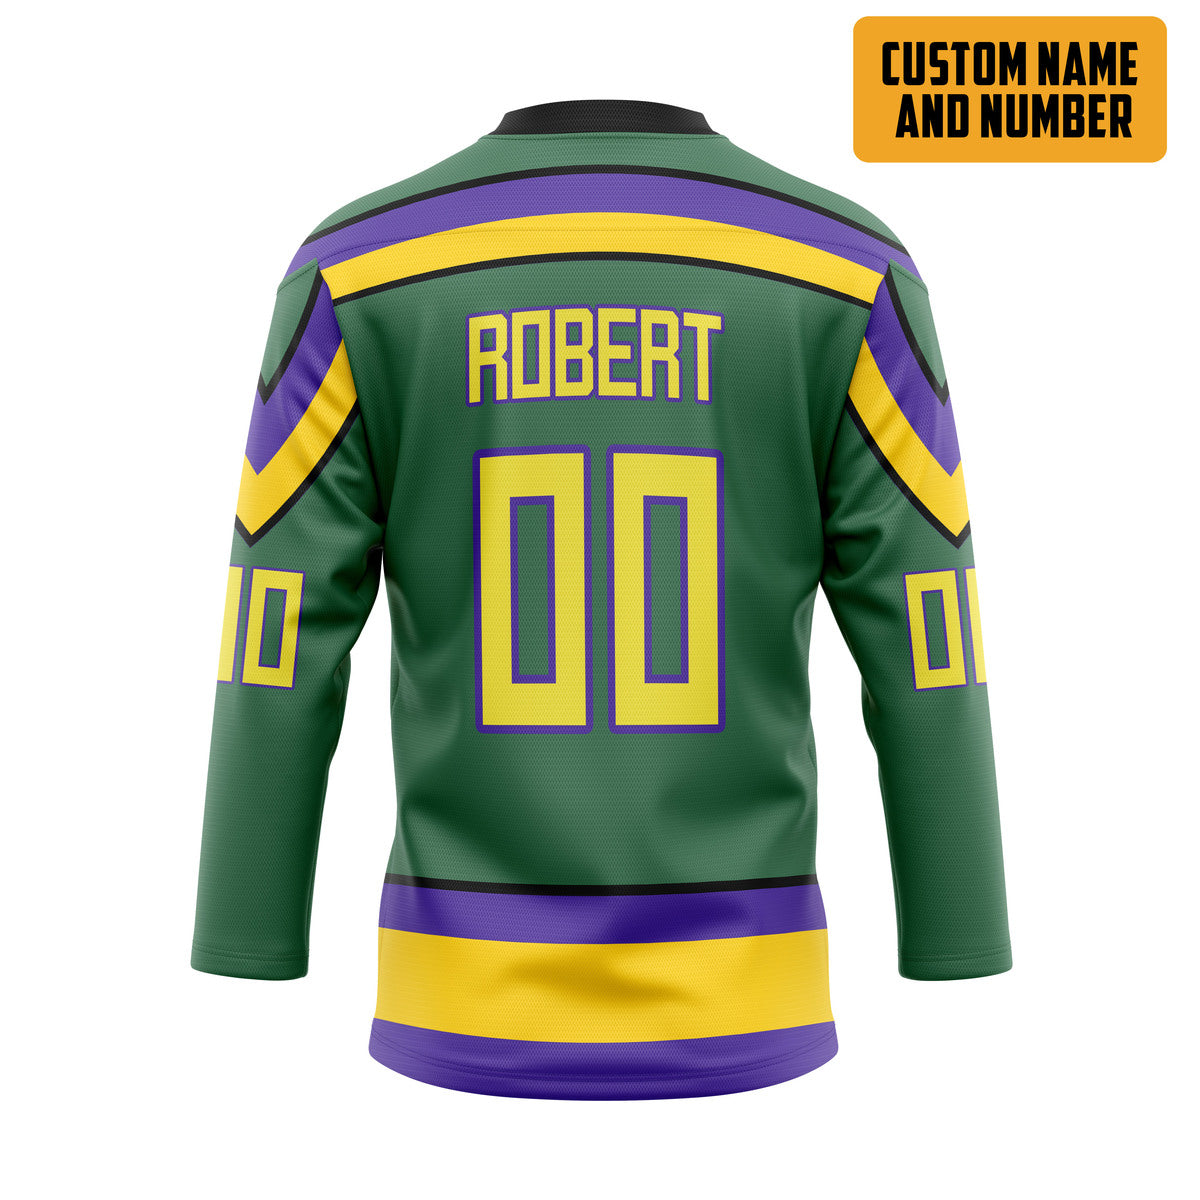 Custom name and number jersey